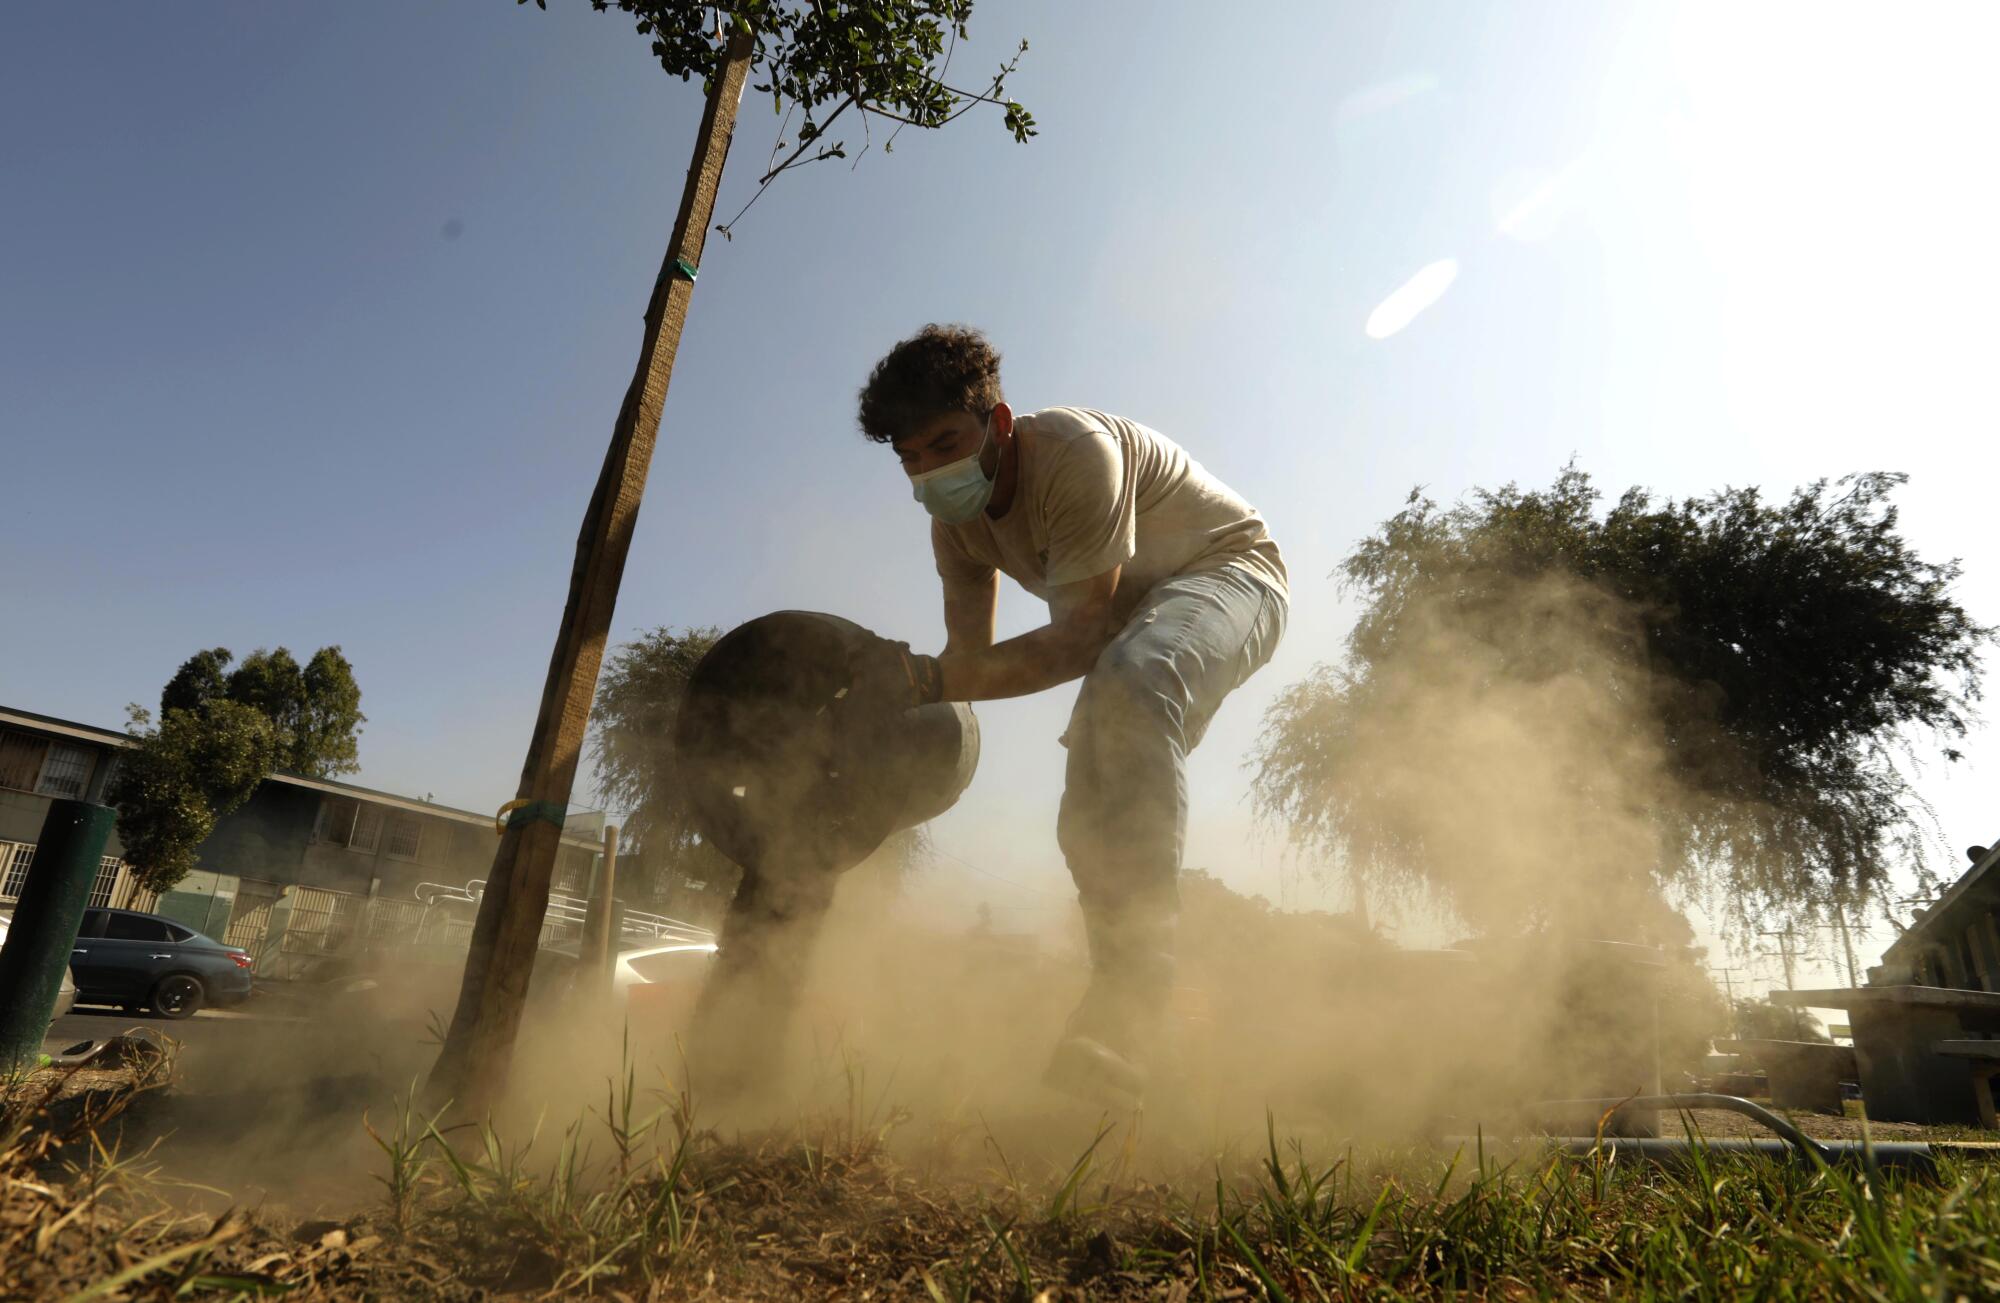 Eduardo Armenta, with North East Trees, plants a tree in the Imperial Gardens public housing in Watts.